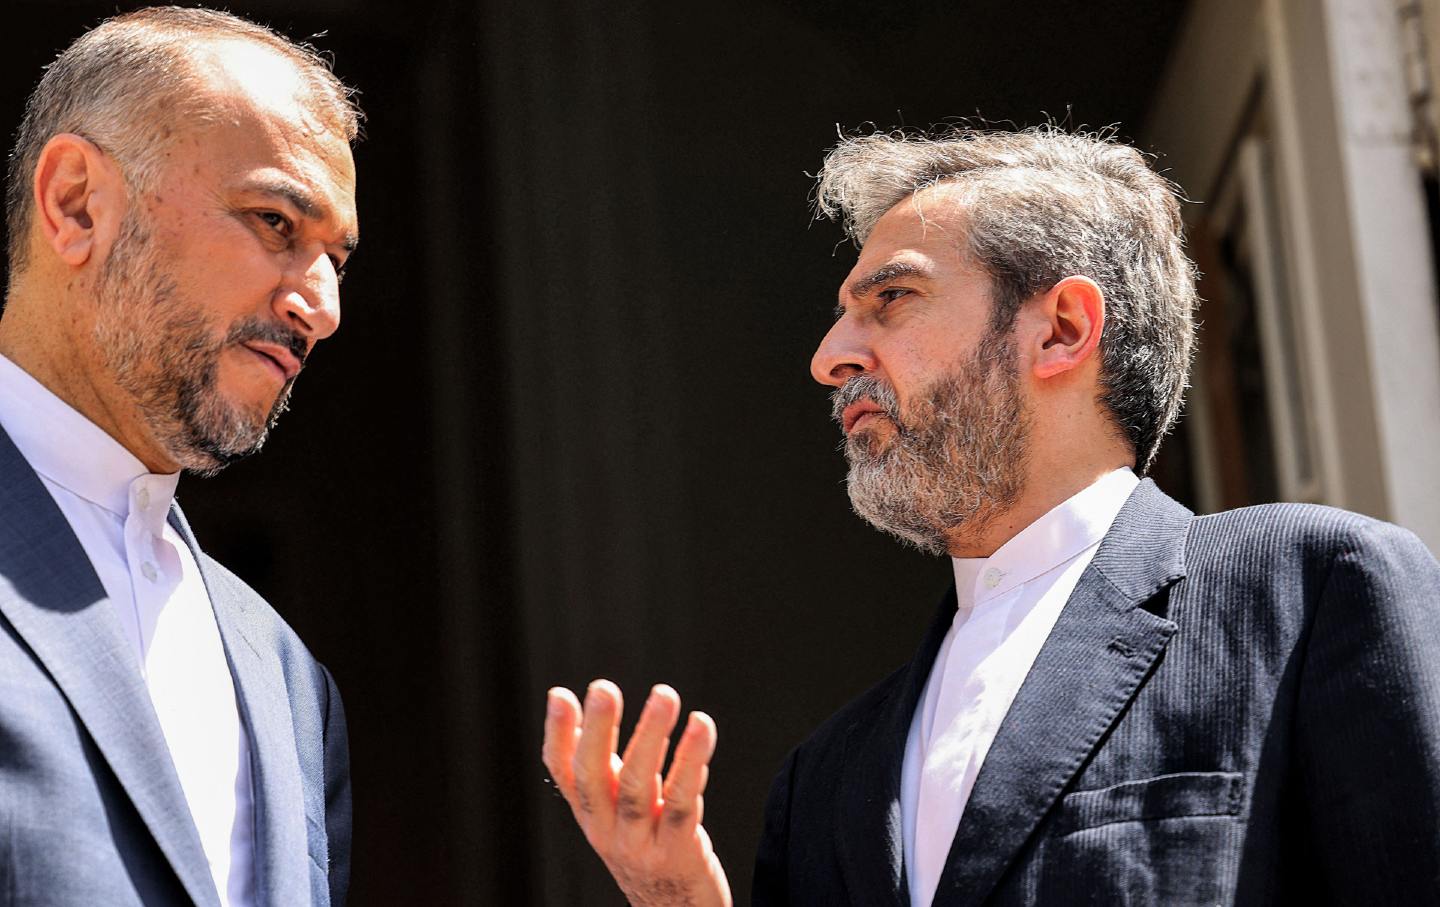 Iranian Foreign Minister Hossein Amir-Abdollahian, left, listens to his deputy foreign minister and chief nuclear negotiator Ali Bagheri Kani, before their meeting with the Russian foreign minister in Tehran on June 23, 2022.